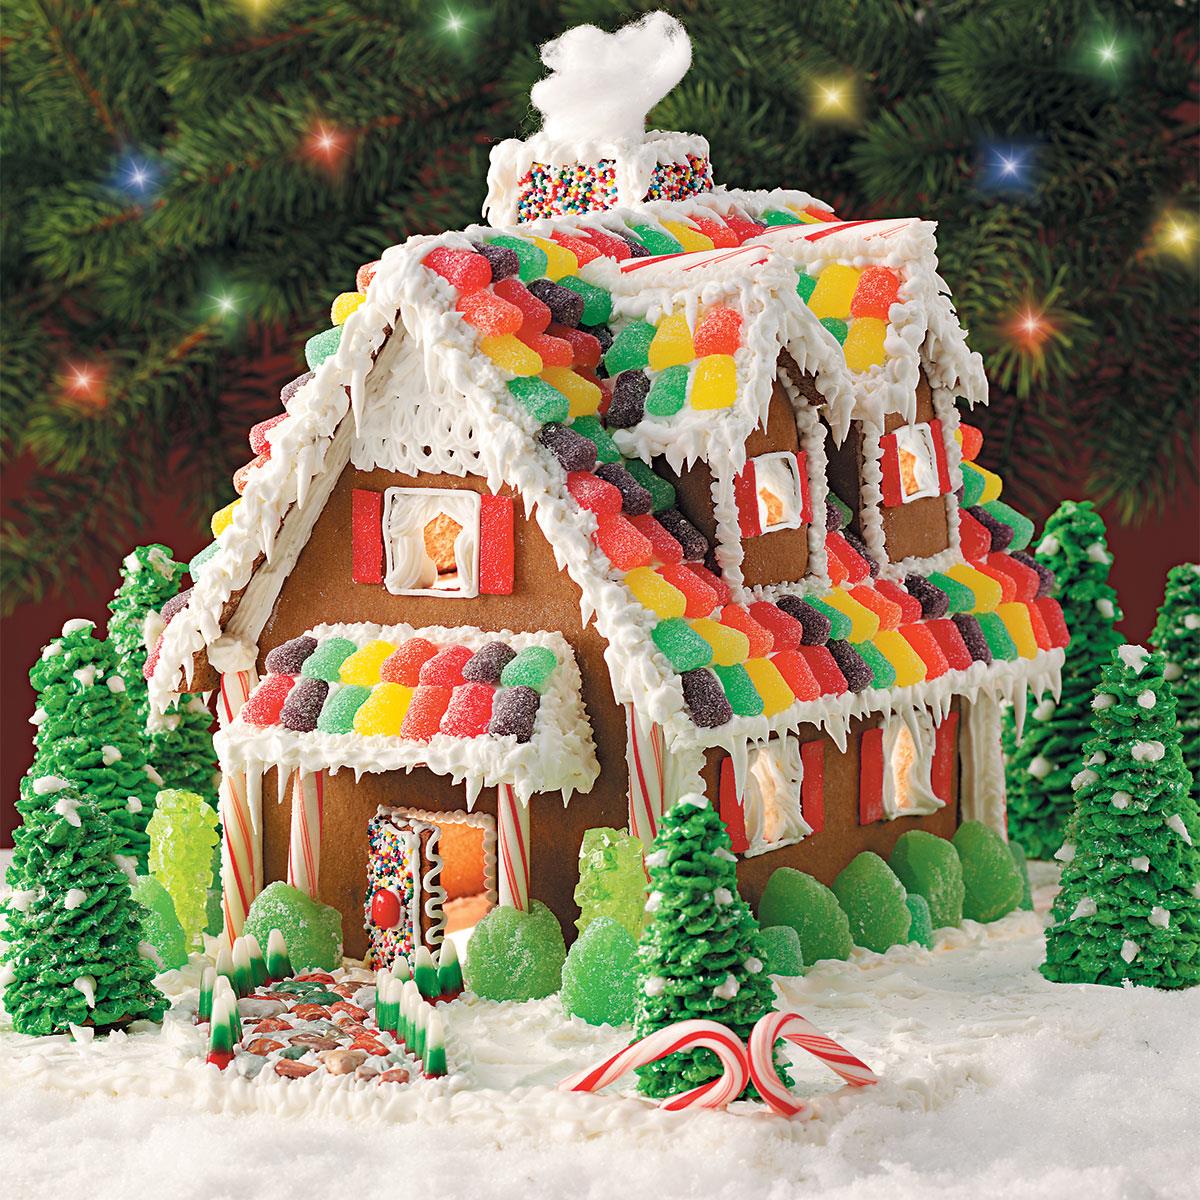 Best Gingerbread House Decoration Ideas and Photo 2021 [Updated]